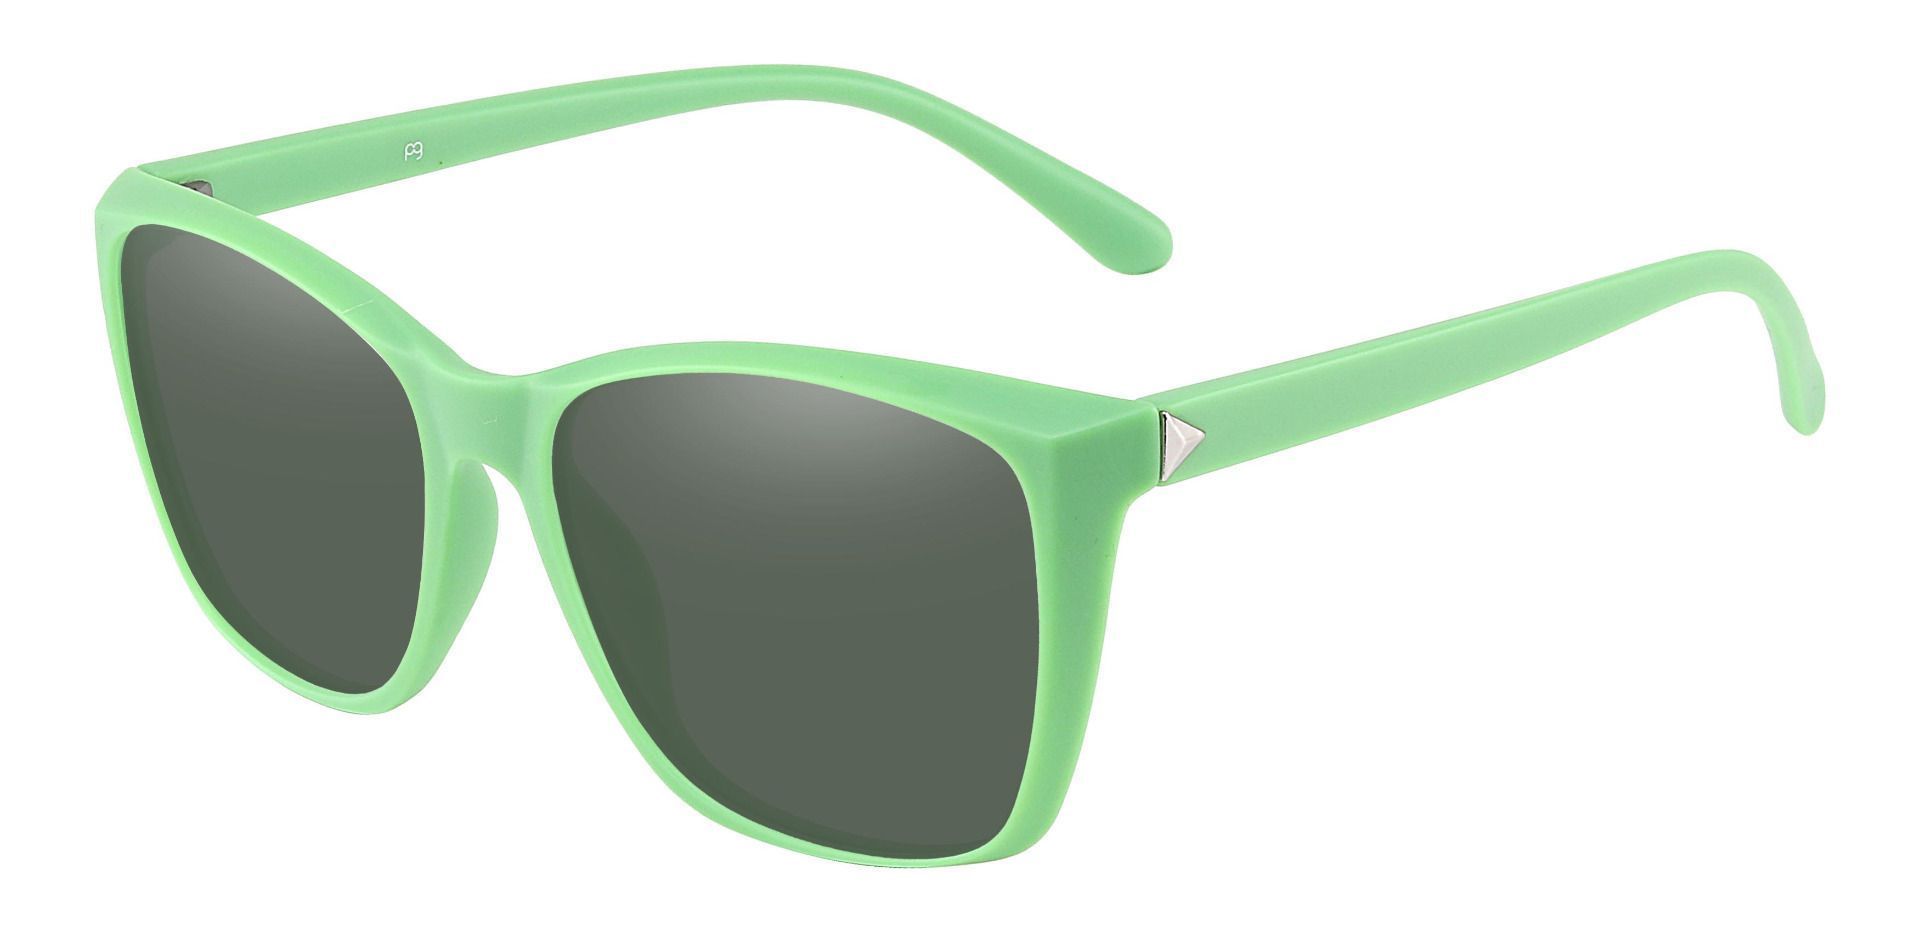 Hickory Square Non-Rx Sunglasses - Green Frame With Green Lenses